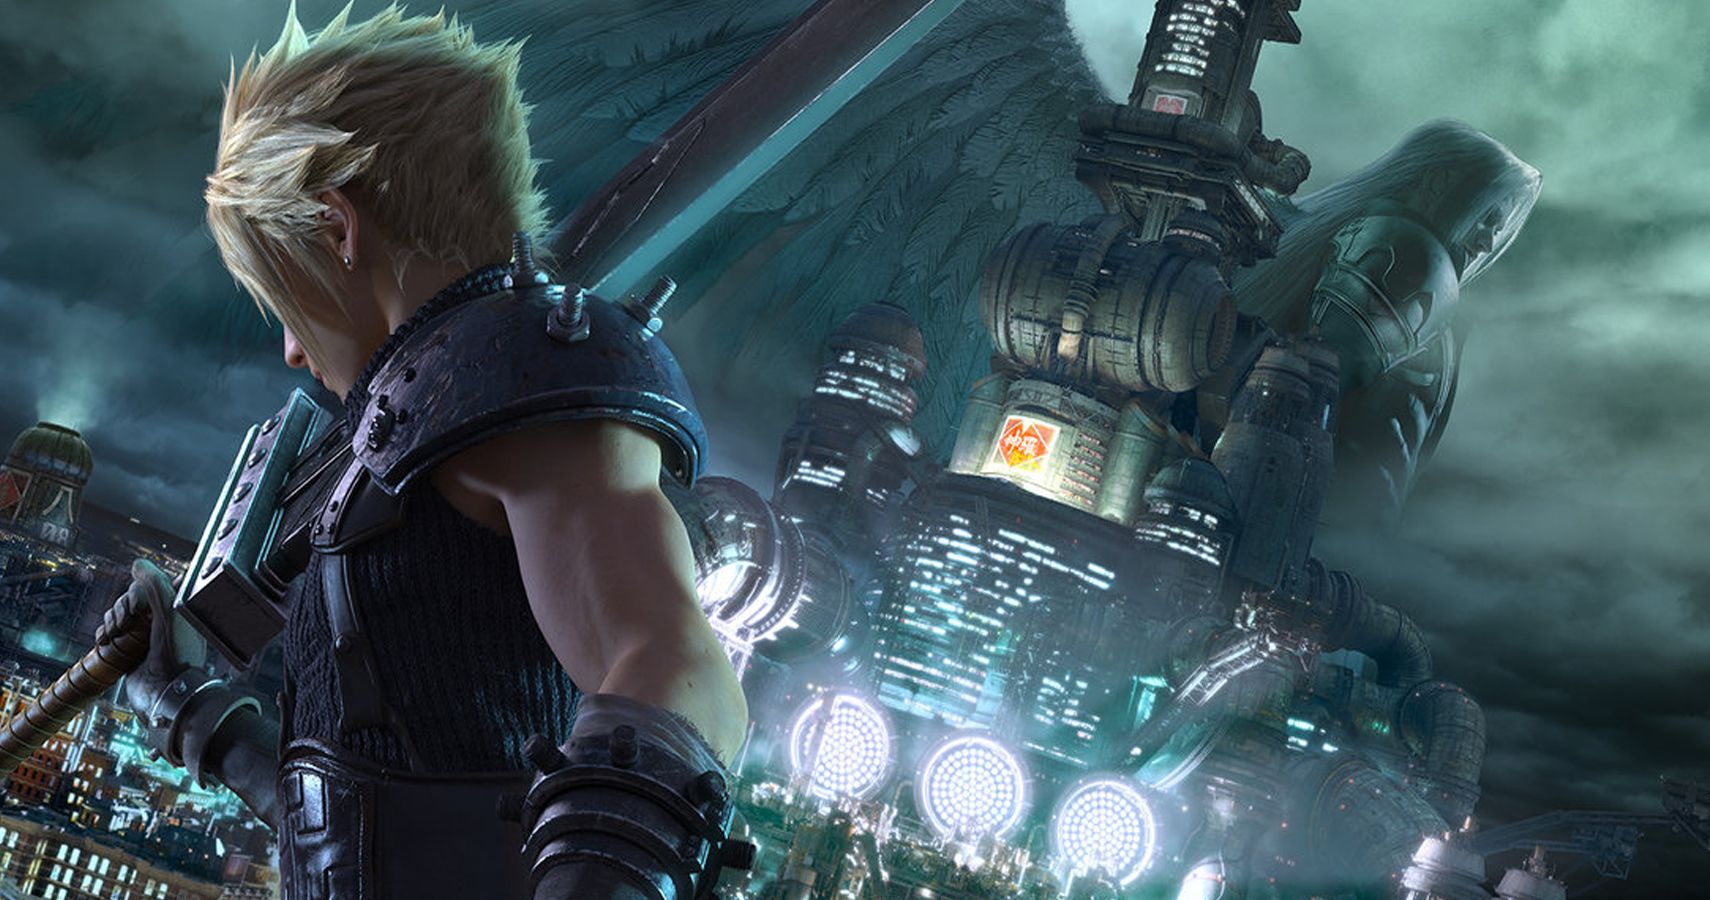 7 Things You (Probably) Didn't Know About Final Fantasy 1 Through